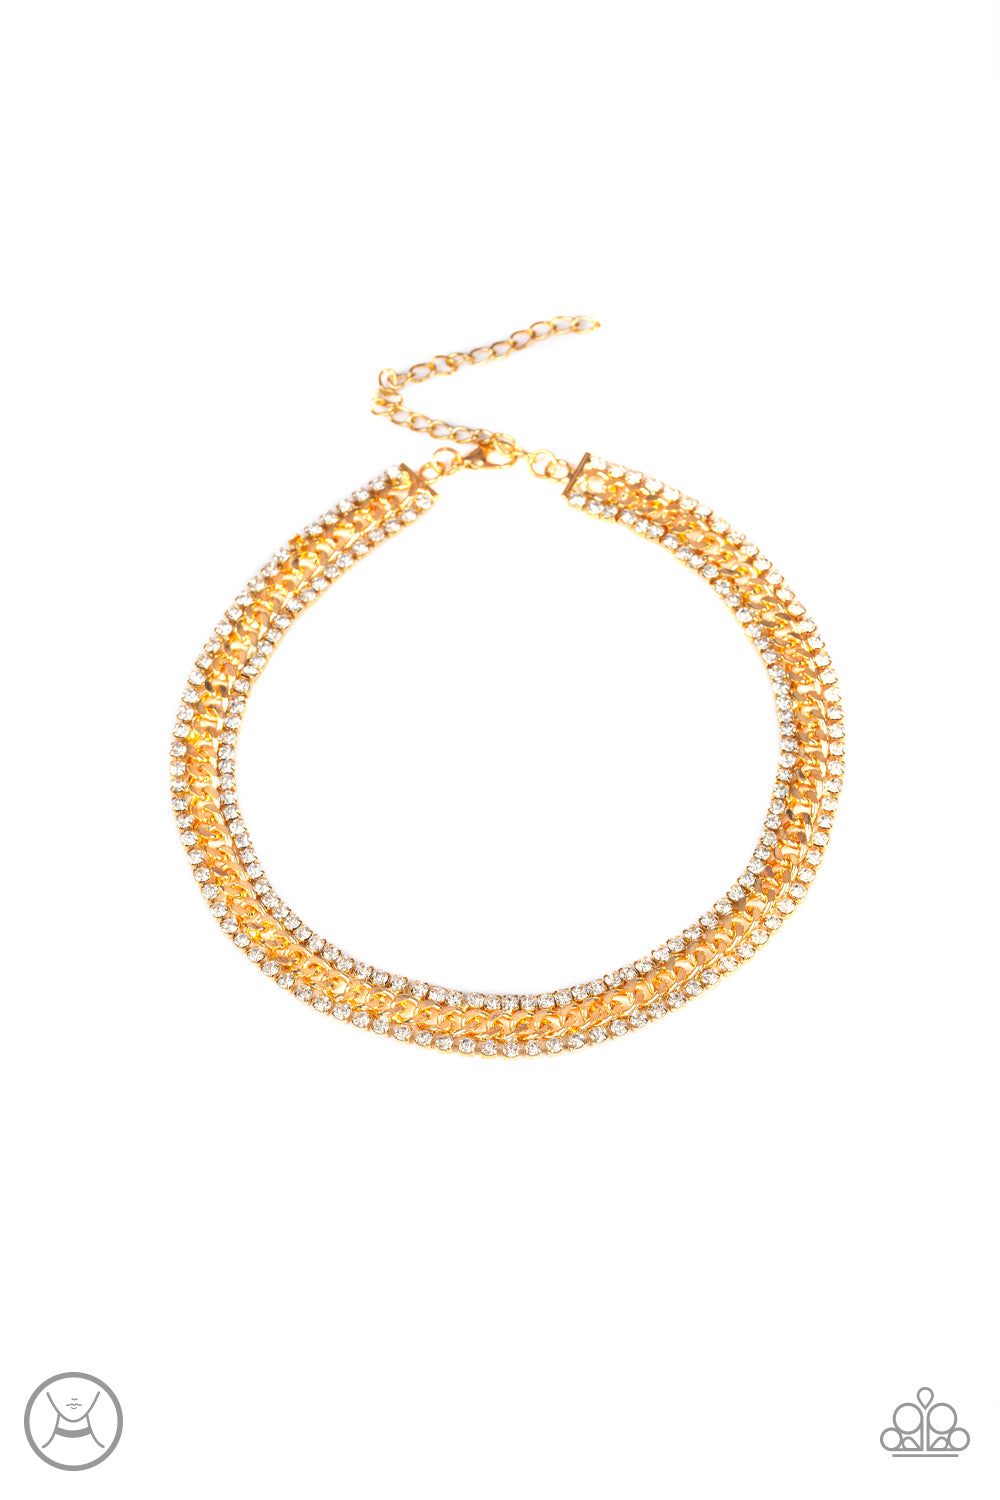 EMPO-HER-MENT - GOLD CHOKER NECKLACE